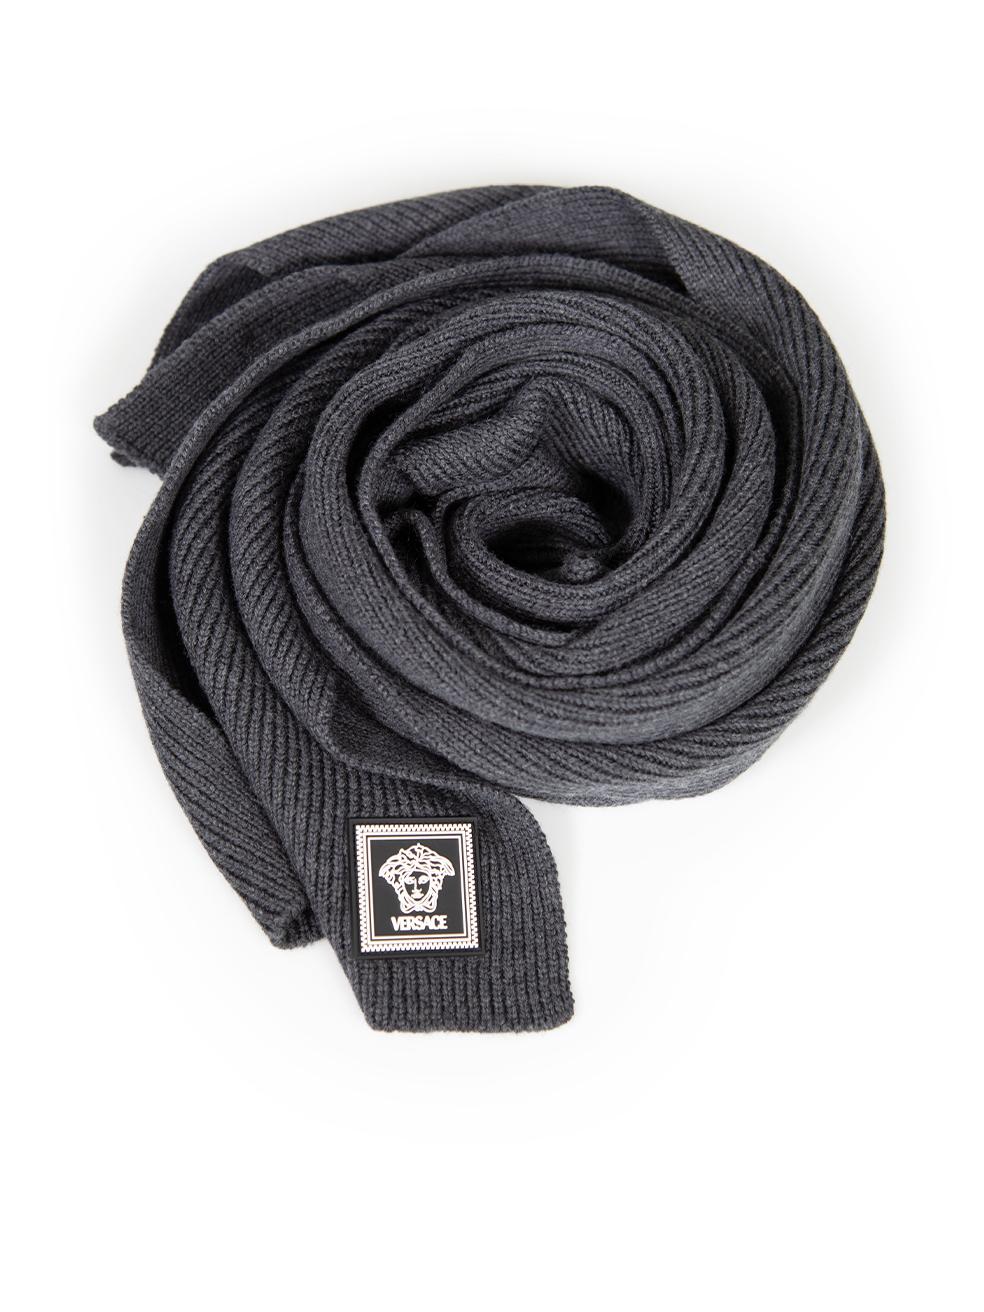 CONDITION is New with tags on this brand new Versace designer item. This item comes with original packaging.
 
 
 
 Details
 
 
 Model: ISC2200
 
 Season: FW23
 
 Grey
 
 Wool
 
 Scarf
 
 Medusa motif
 
 
 
 
 
 Made in Italy
 
 
 
 Composition
 
